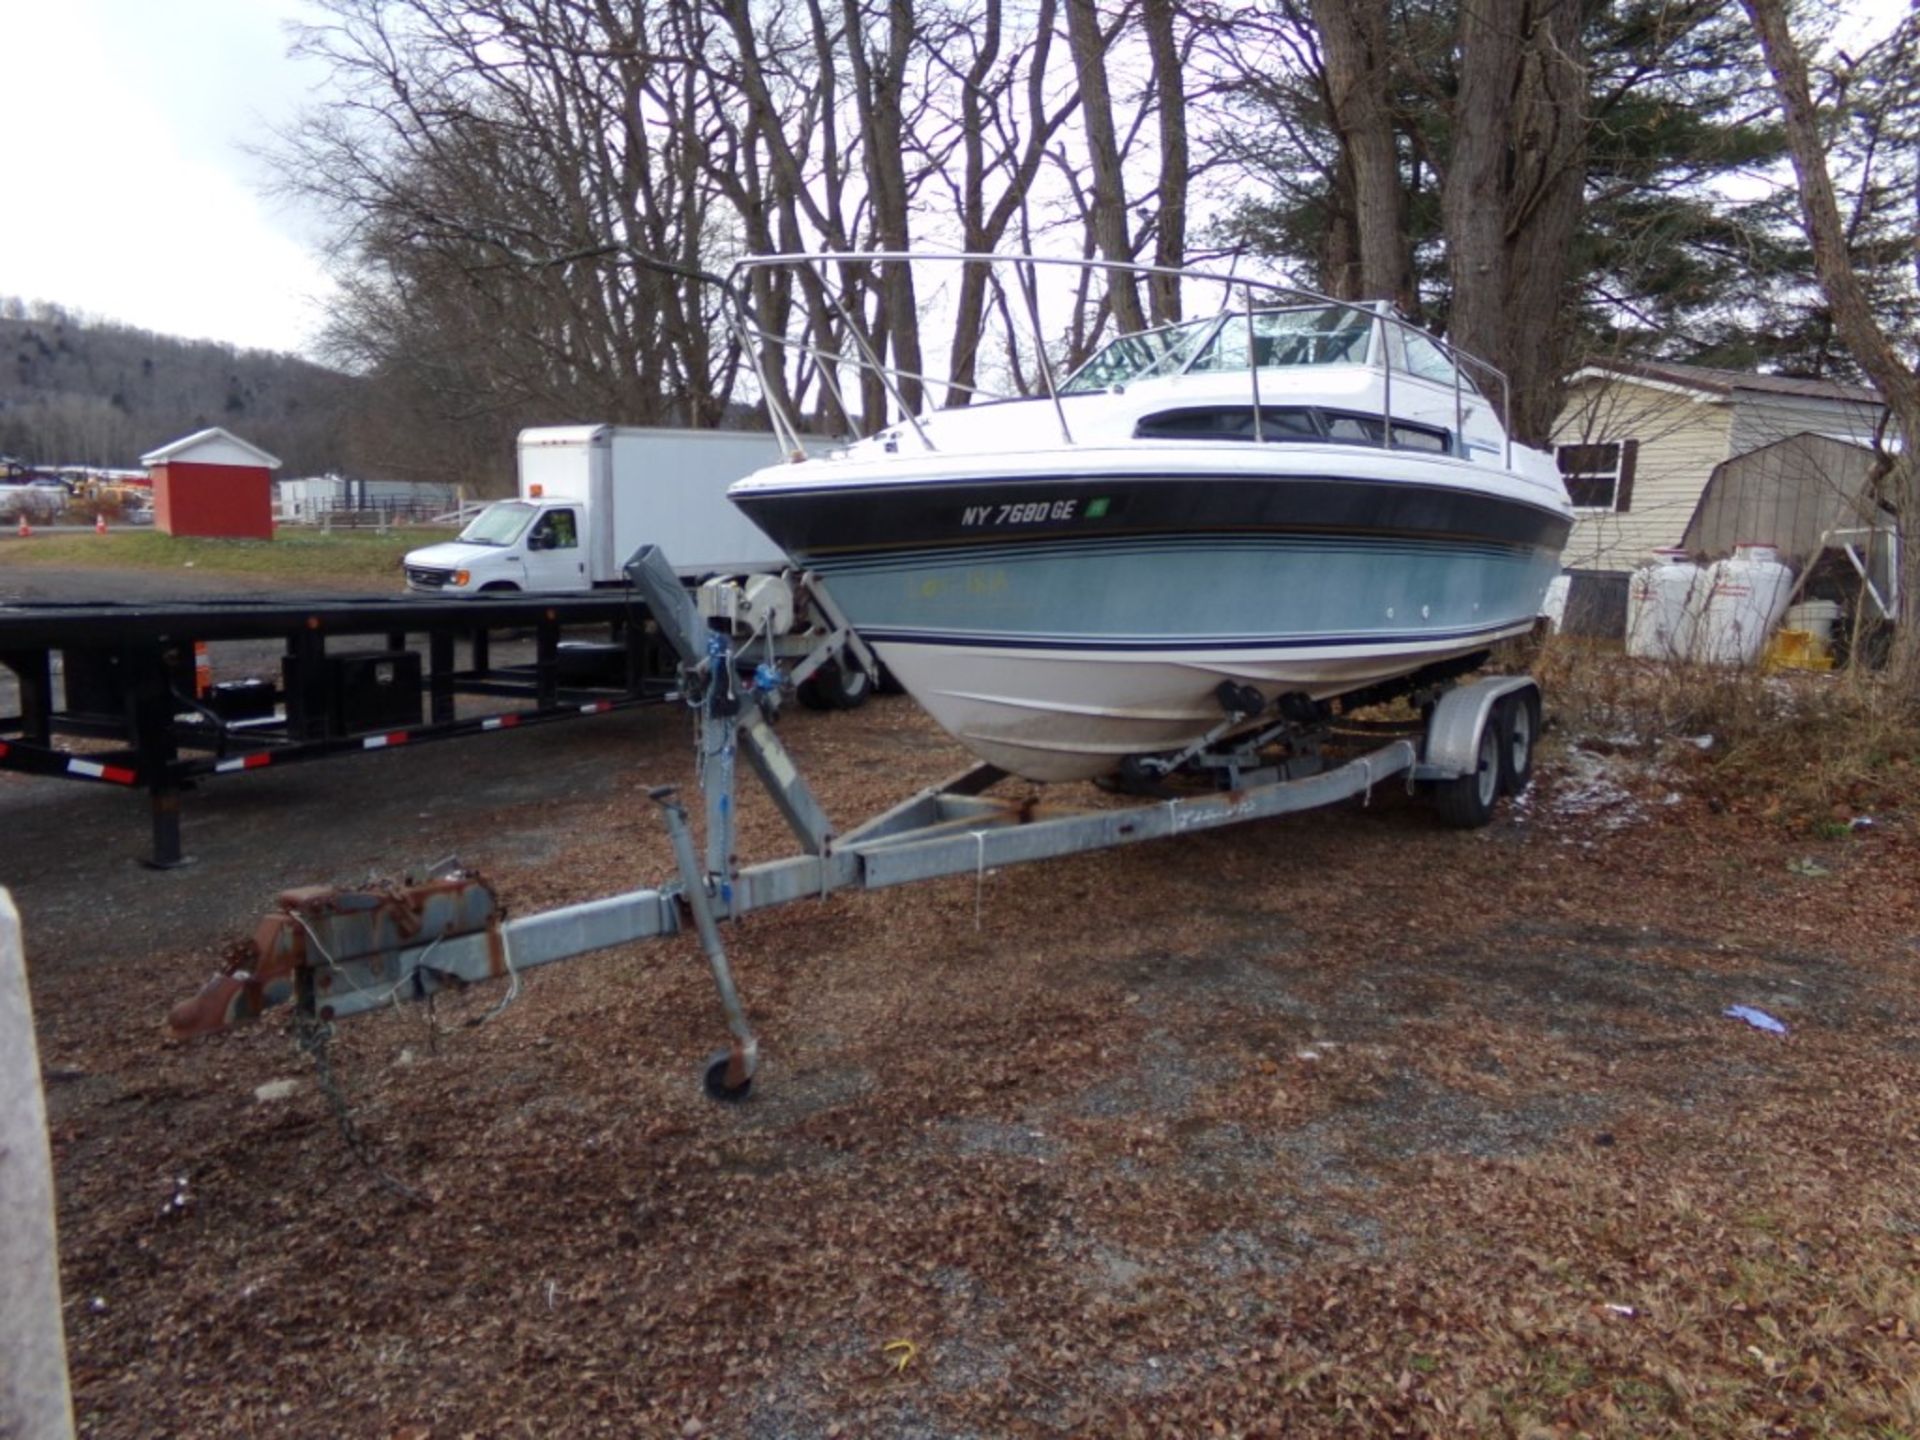 1987 ASI / Imperial 240FC Boat, Approx. 26' Long, Mercruiser Inboard/Outboard Motor, VIIN#: